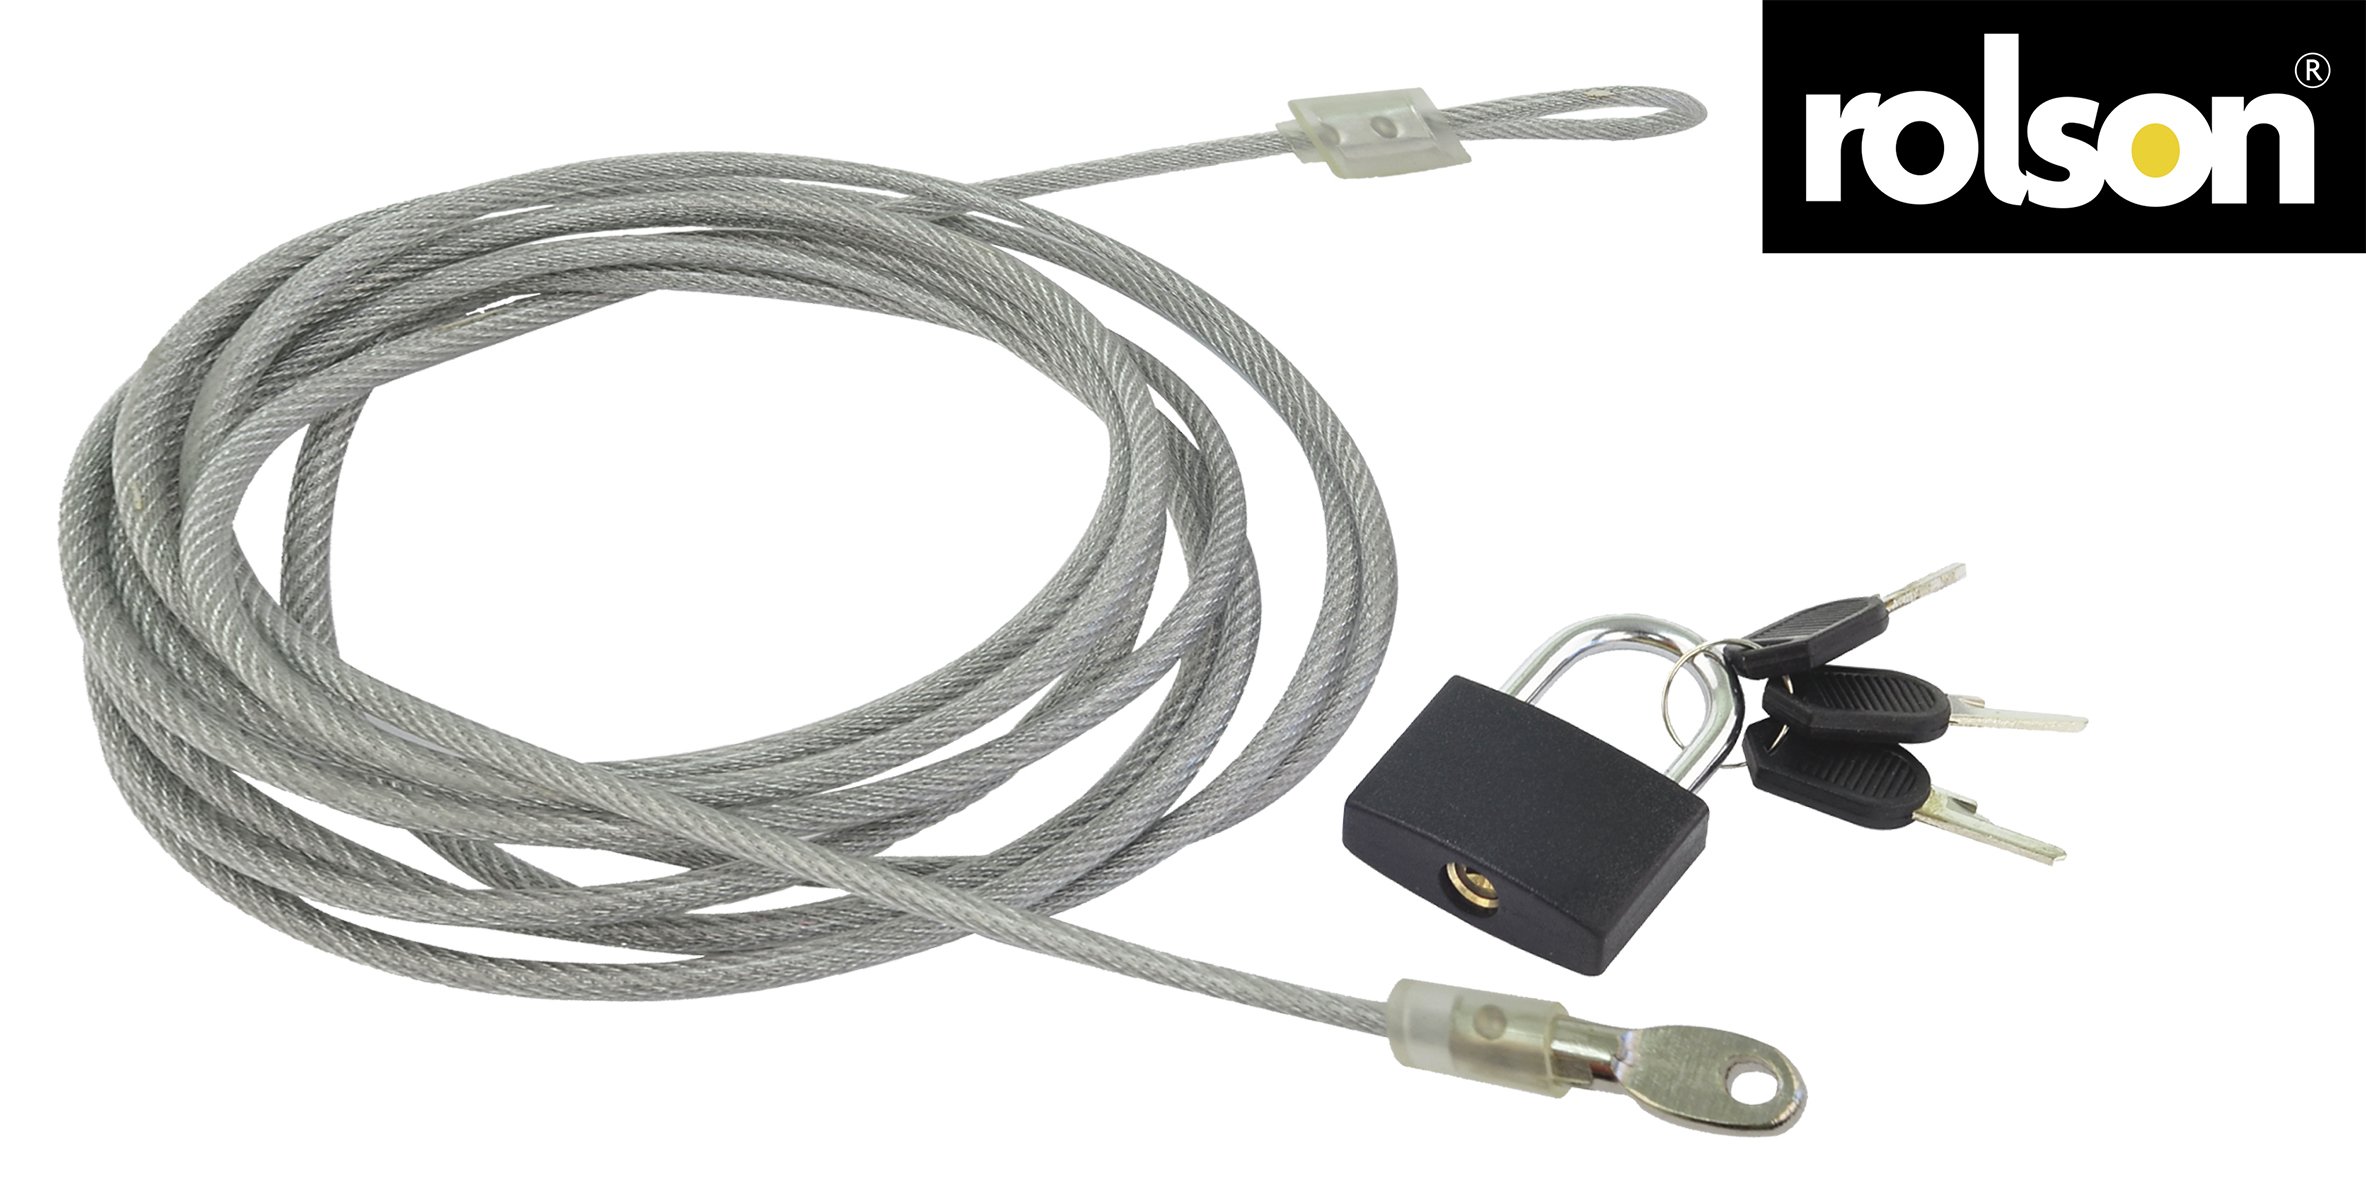 Rolson Security Cable and Bike Lock - 3m